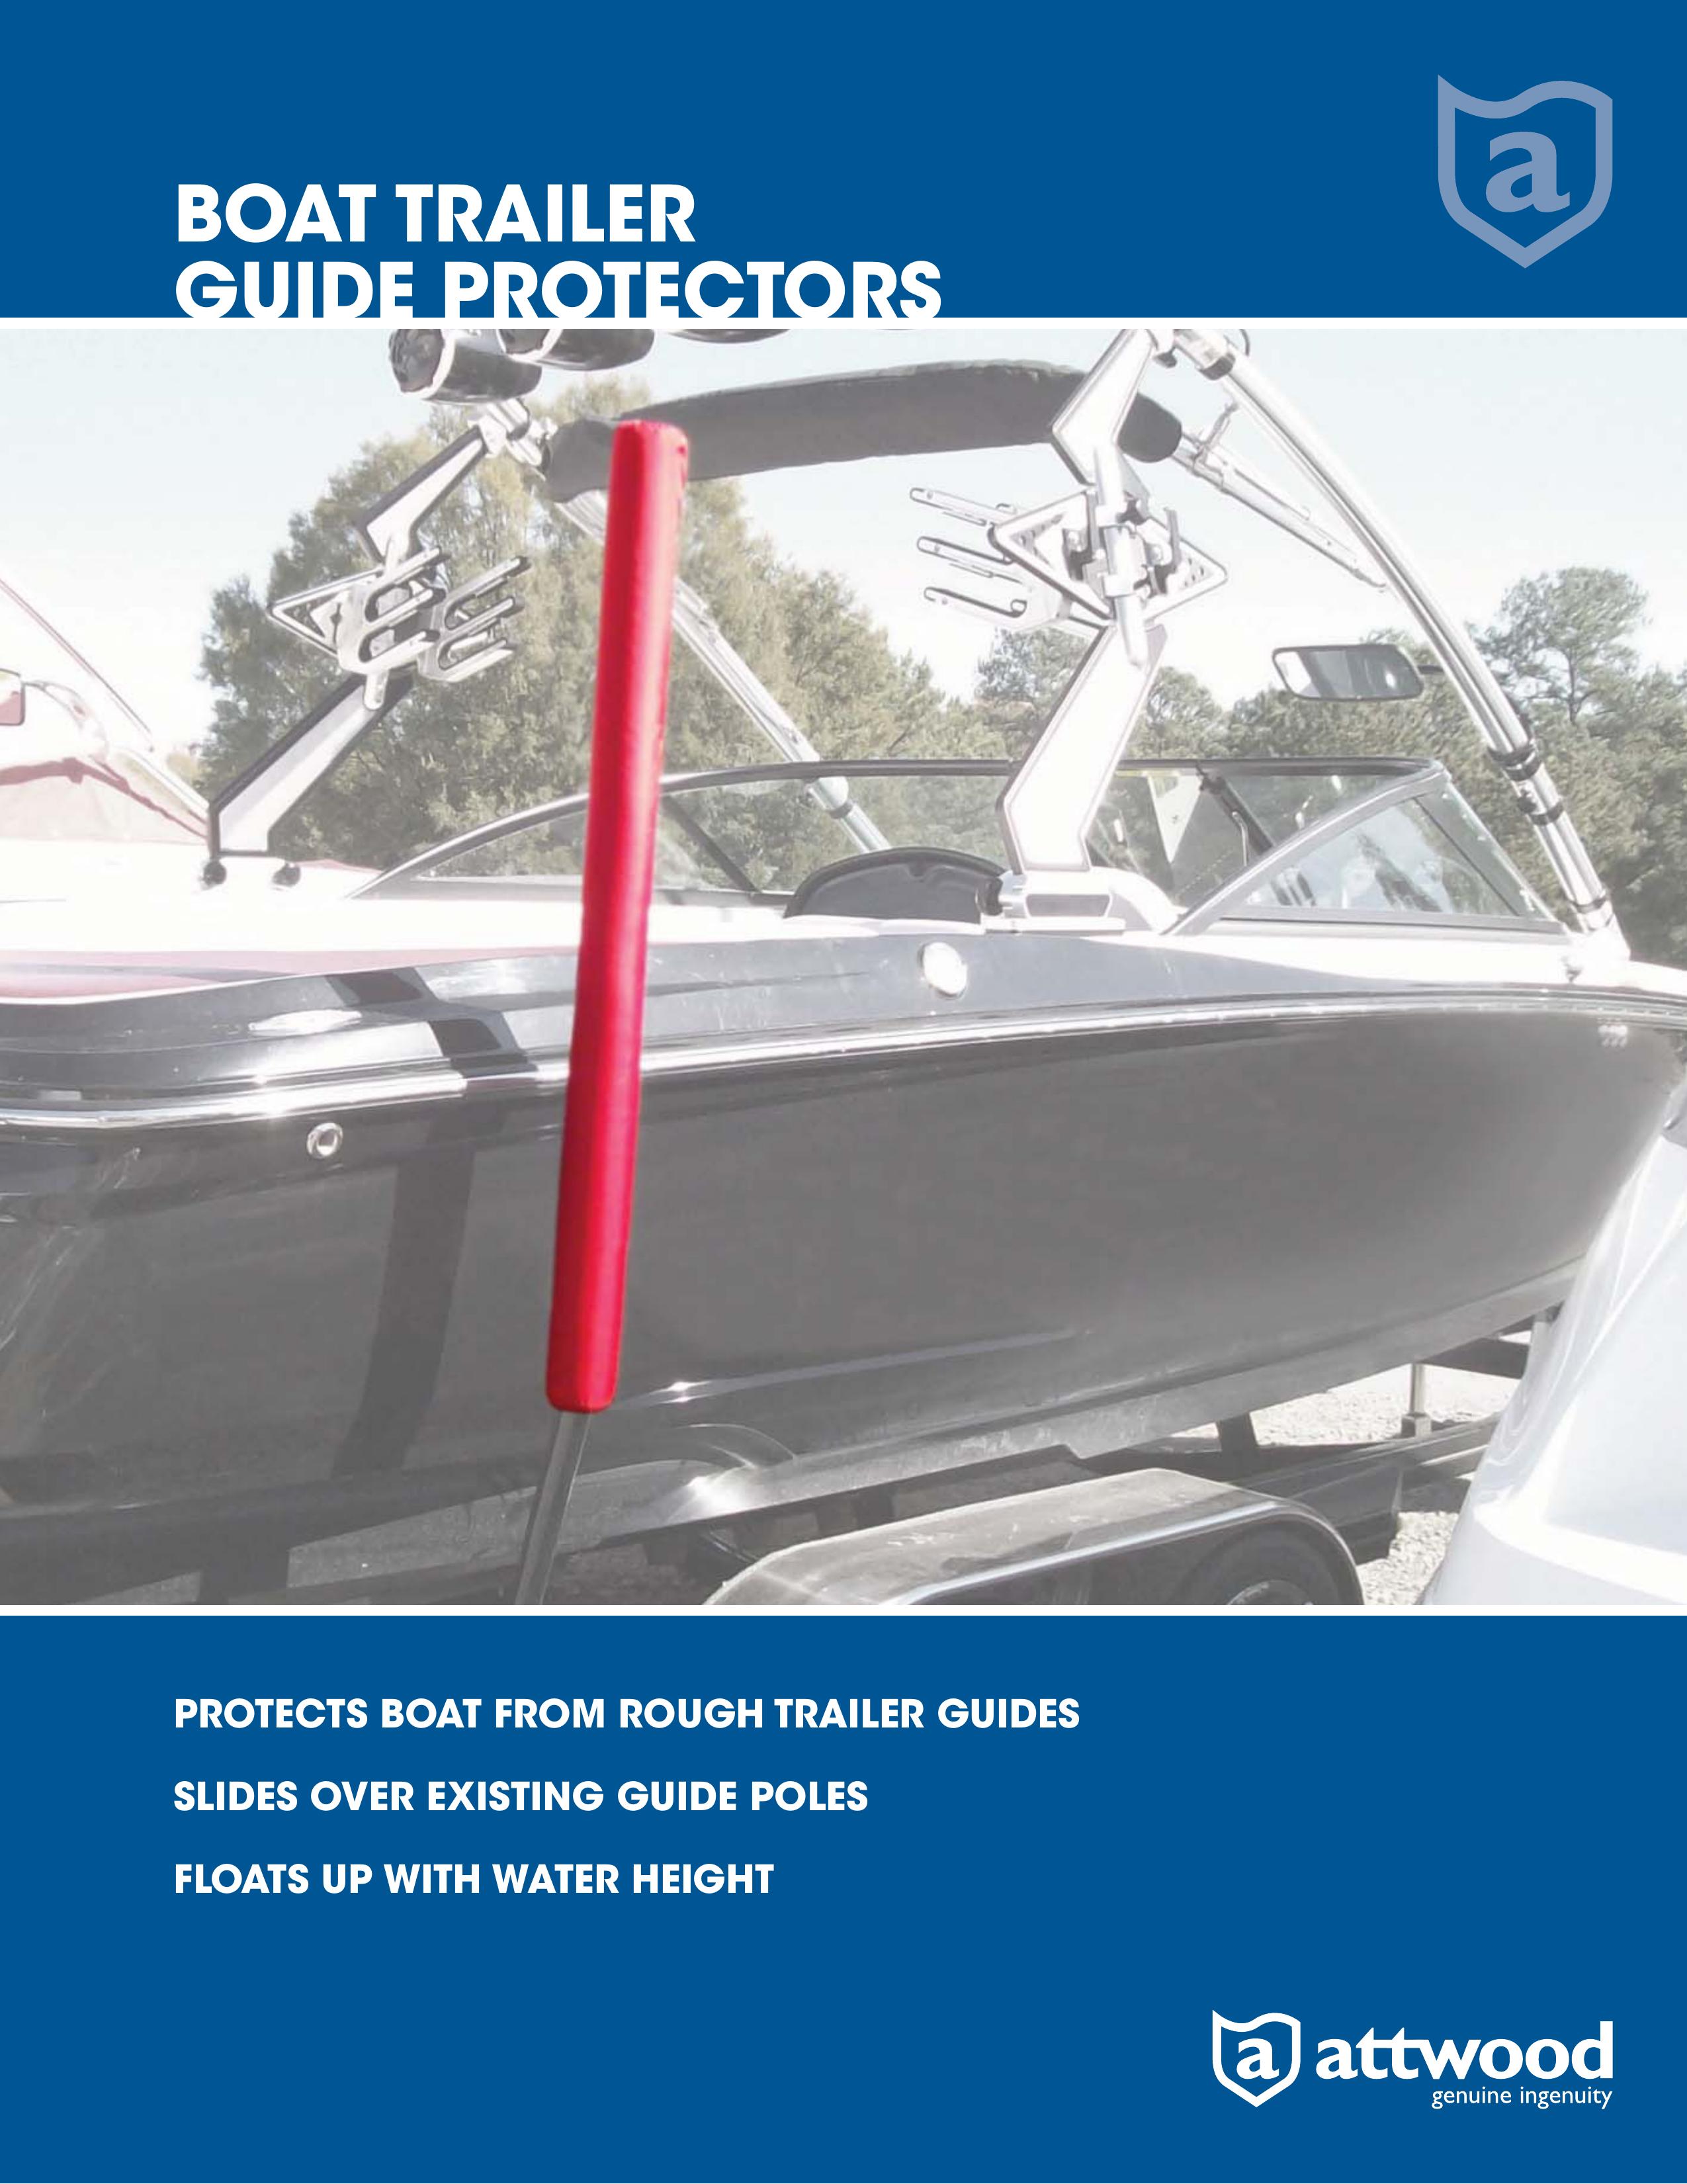 Attwood 105696SV Boat Trailer User Manual (Page 1)